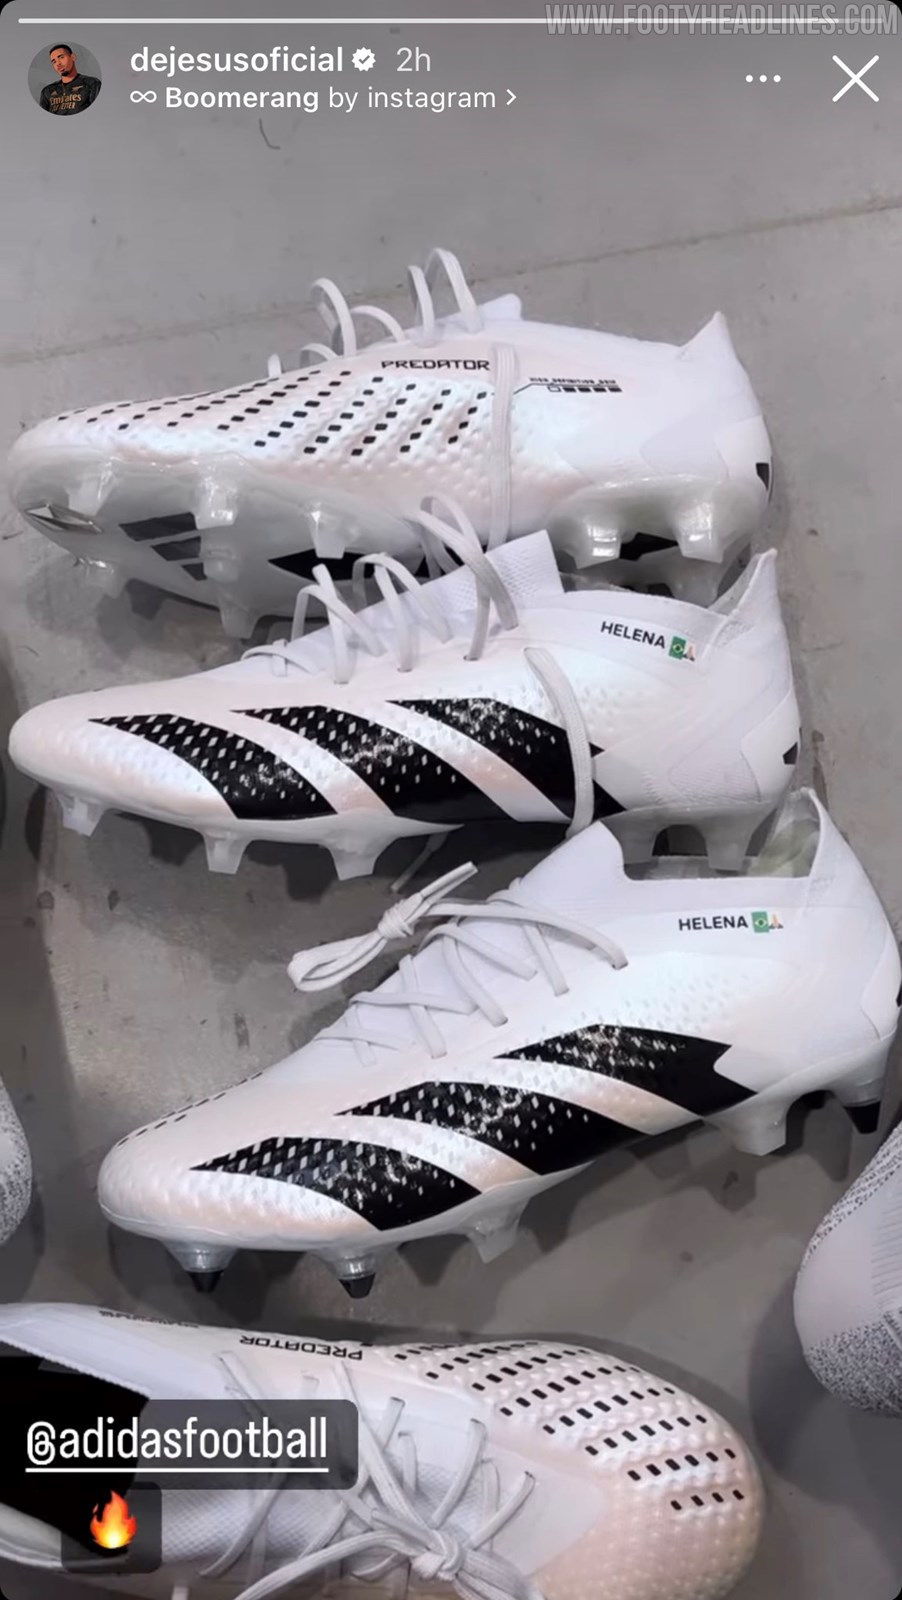 White/Black Next-Gen Adidas Predator Accuracy Boots Leaked - Worn 7 Months  Ahead of Launch? - Footy Headlines